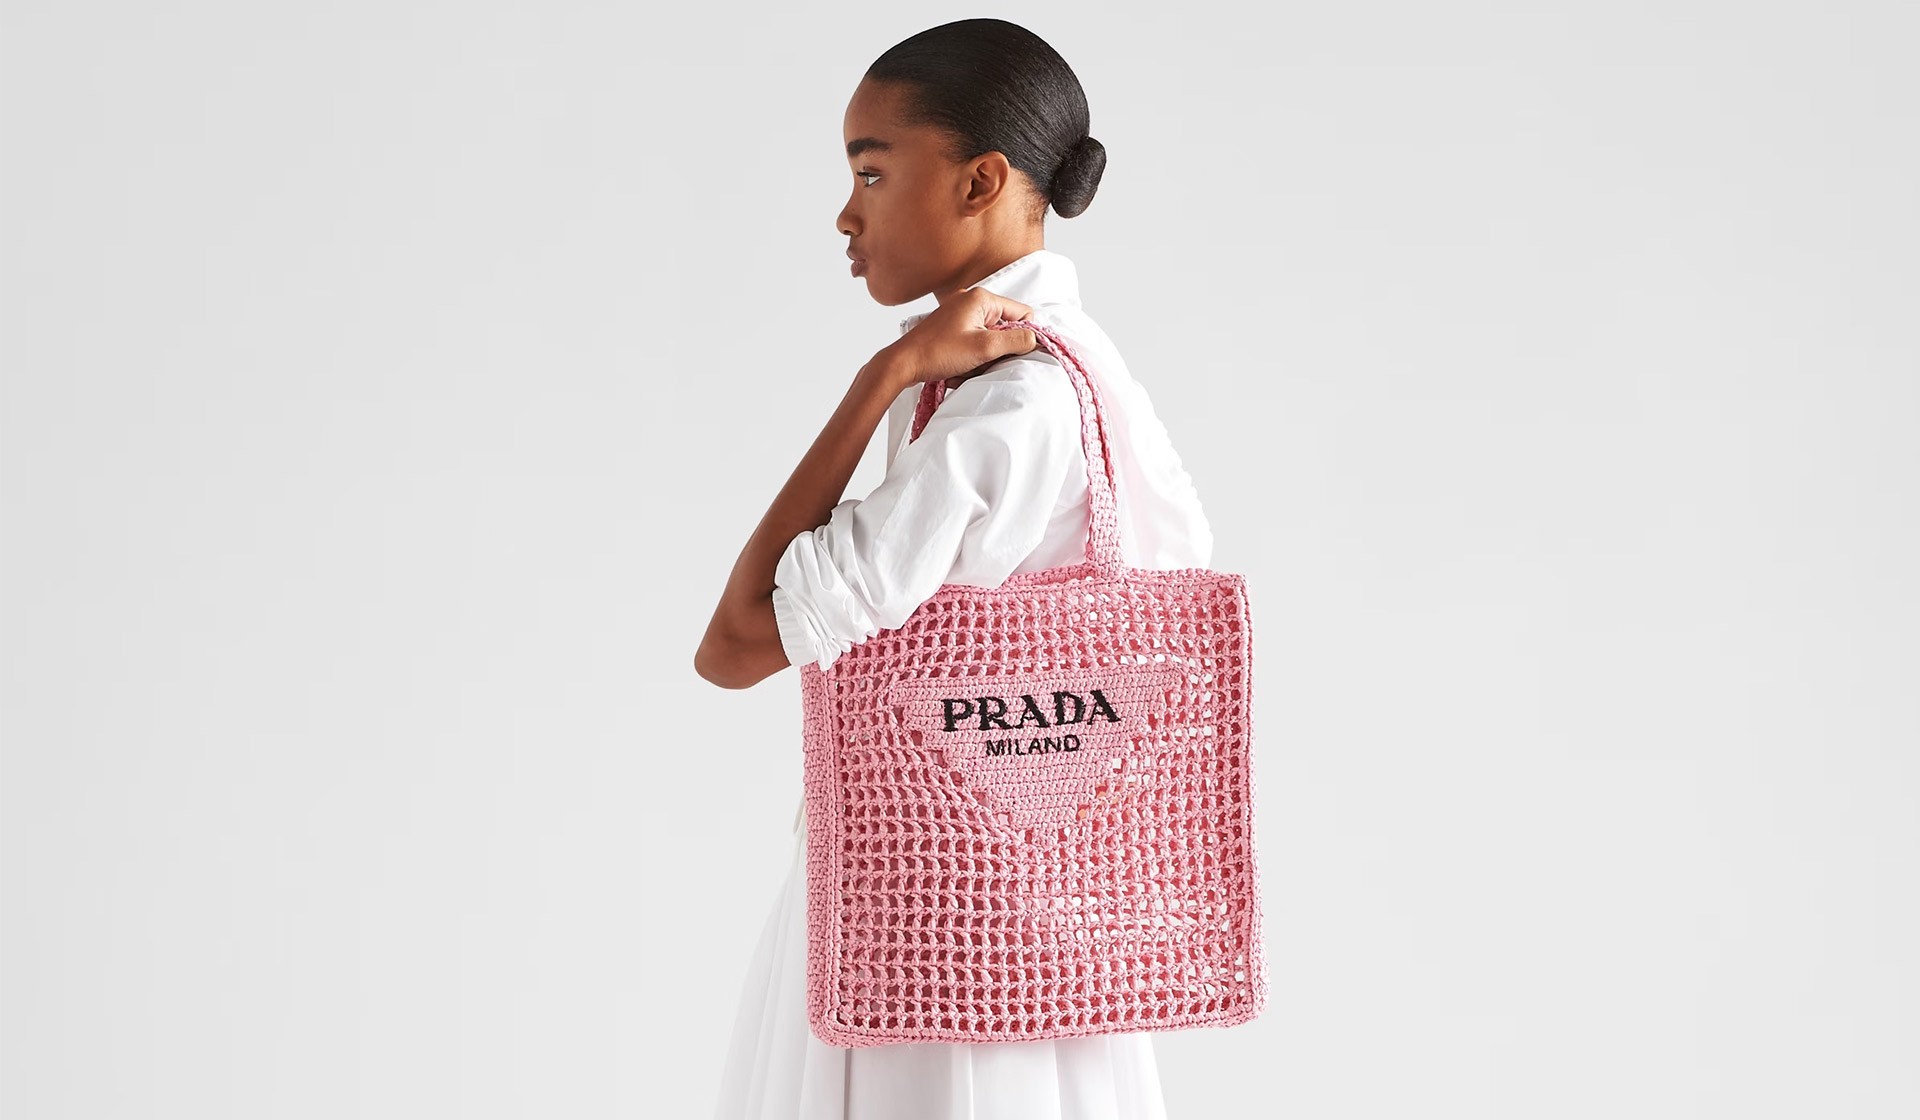 MY OTHER BAGS ARE PRADA Grocery Bag